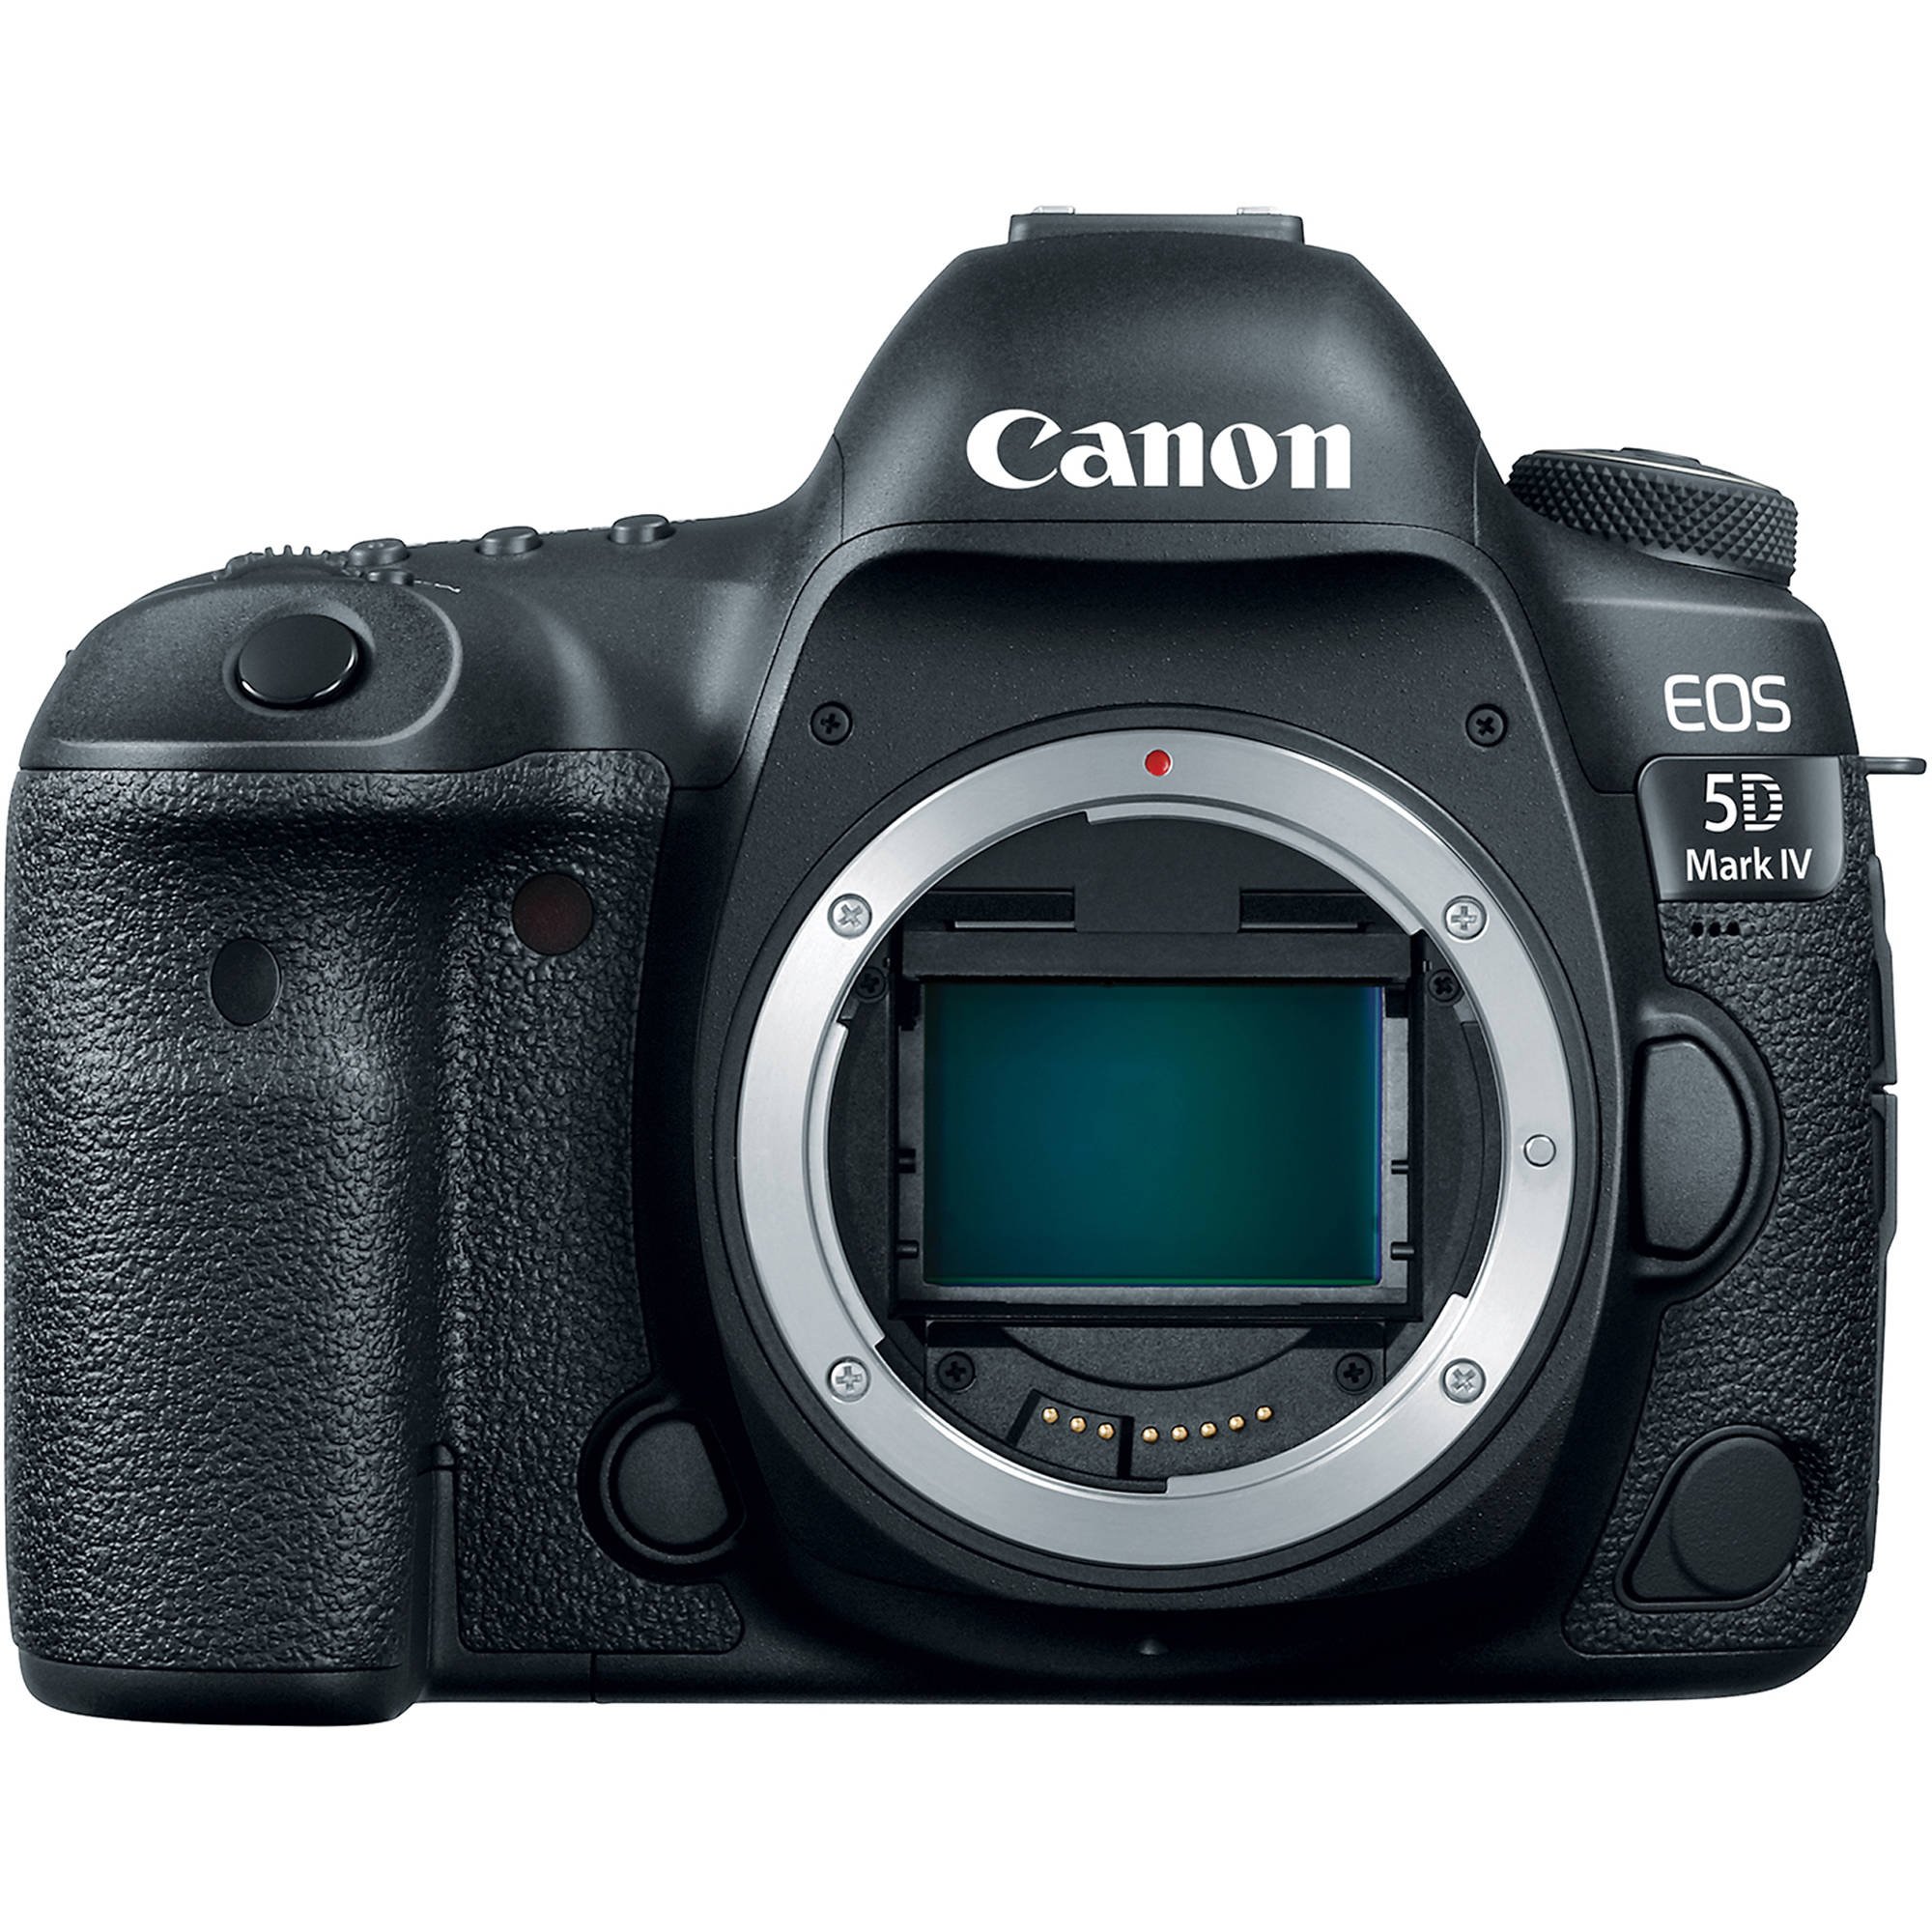 Canon EOS 5D Mark IV DSLR Camera International Version (No Warranty)(Body Only) + Professional Cleaning Kit - image 2 of 5